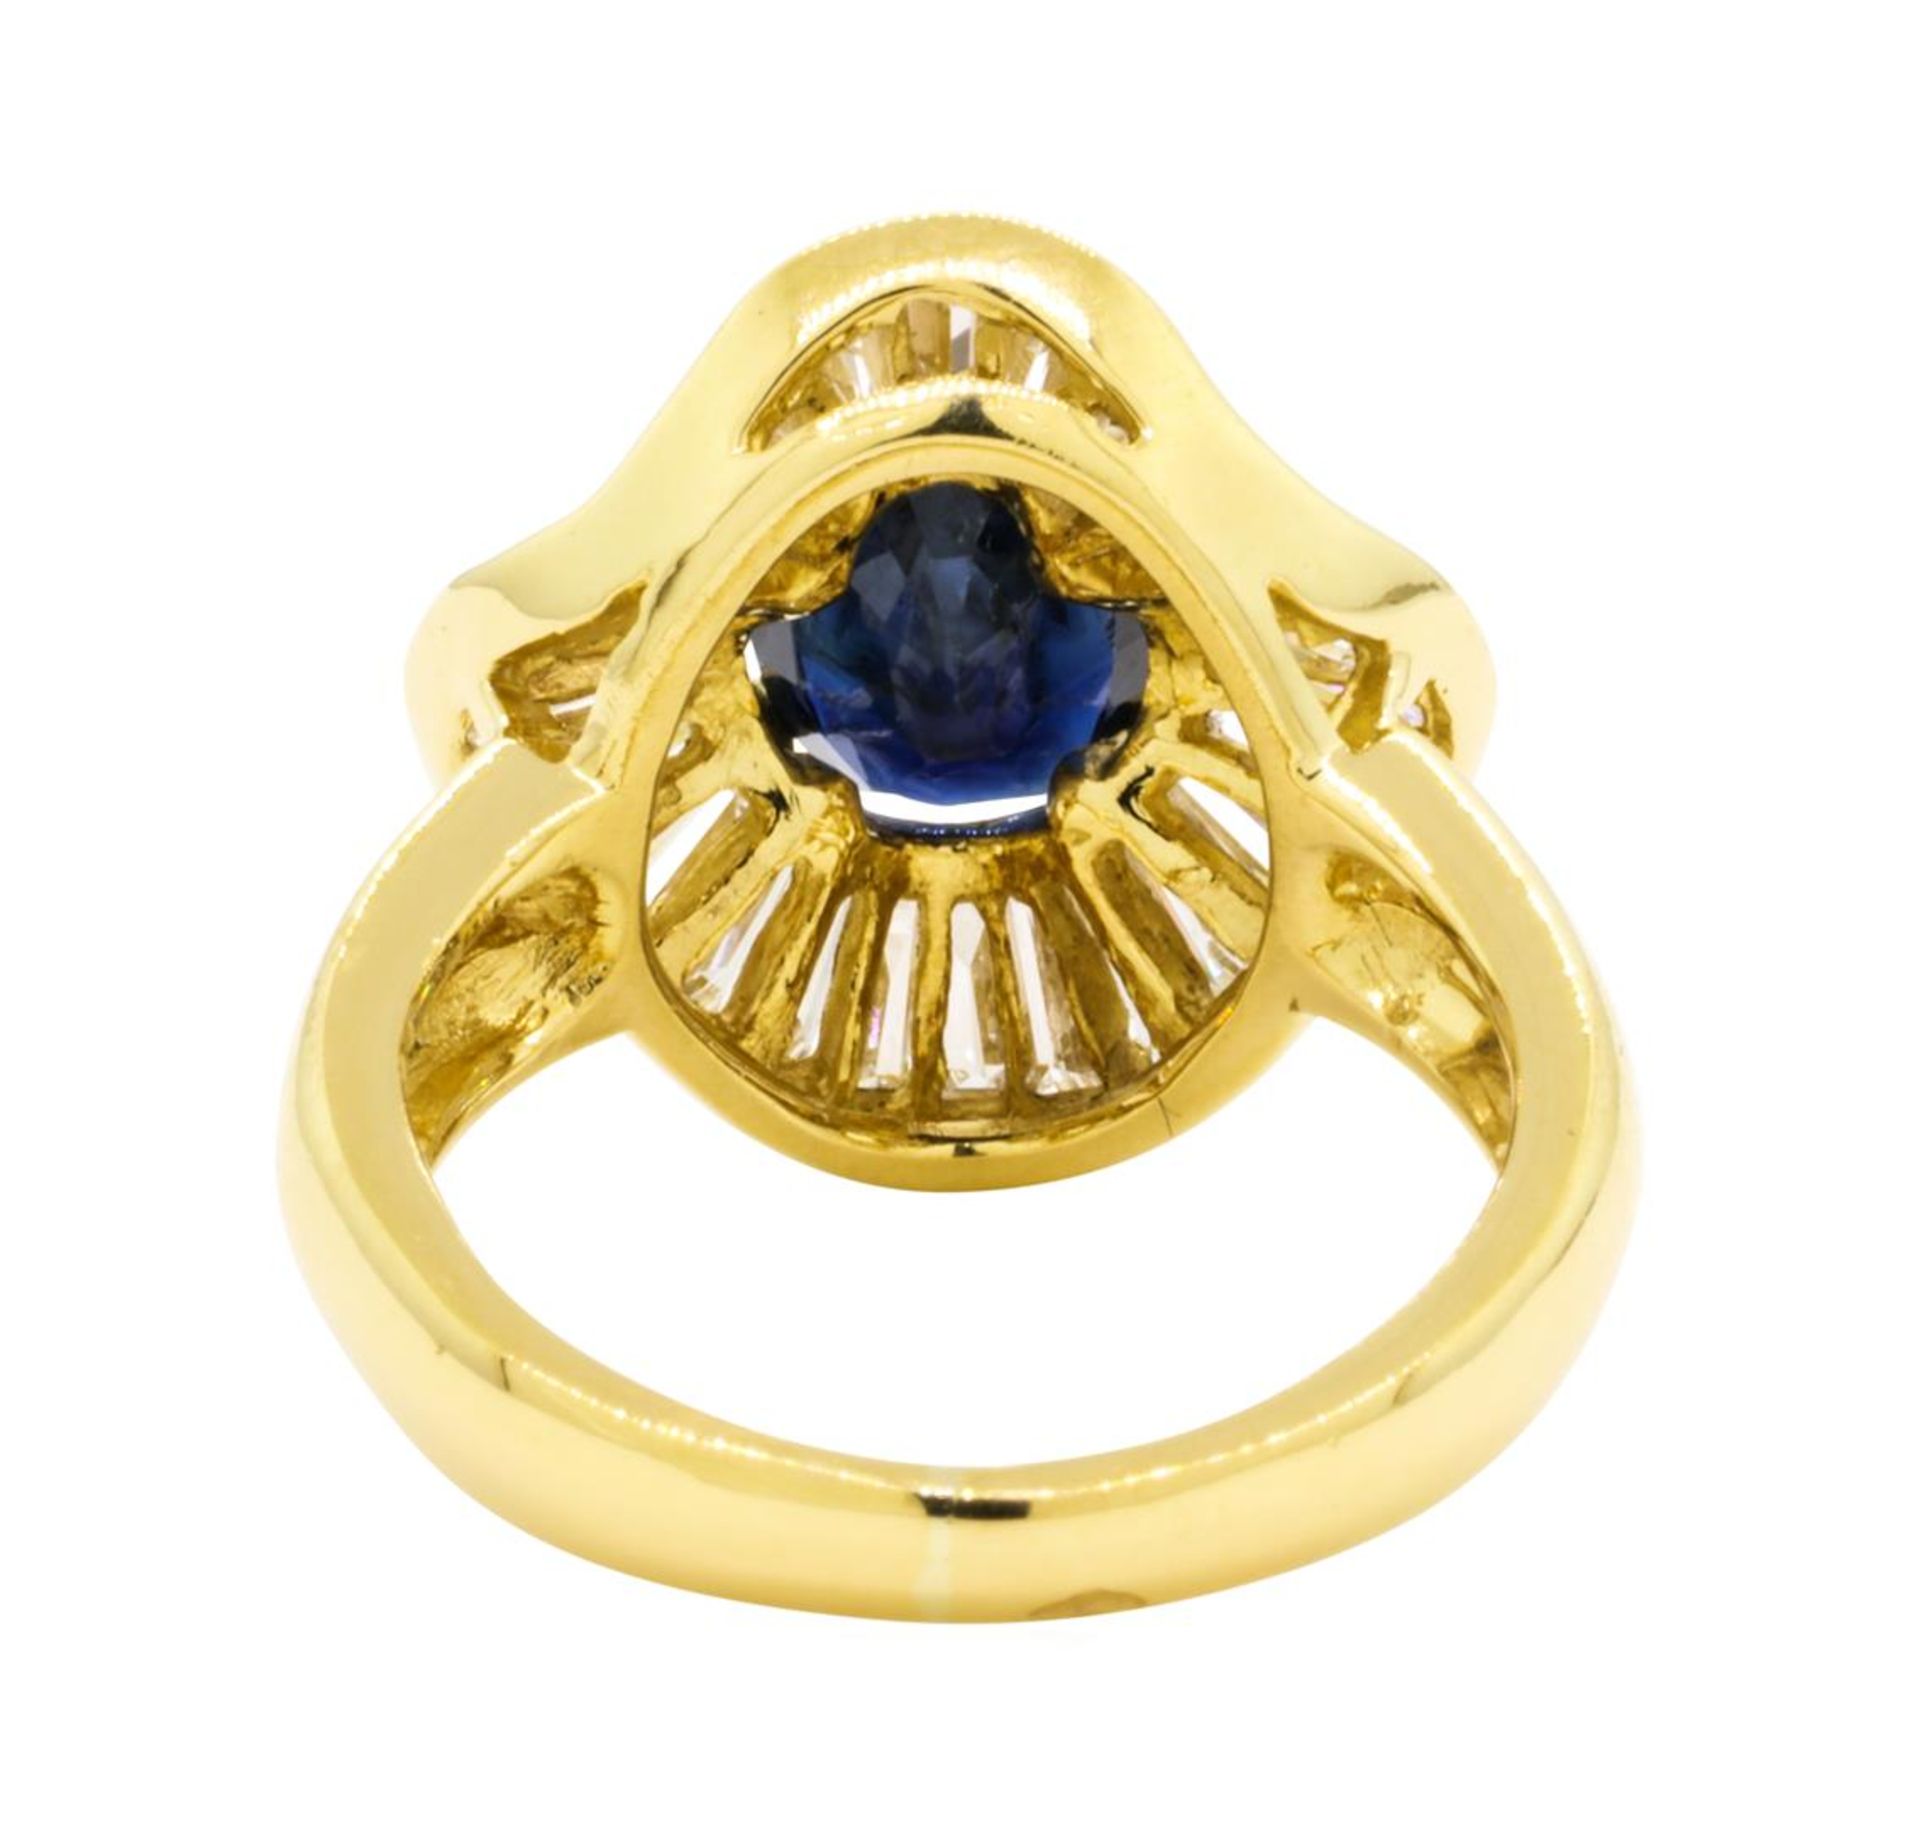 2.90 ctw Sapphire and Diamond Ring - 18KT Yellow Gold - Image 3 of 5